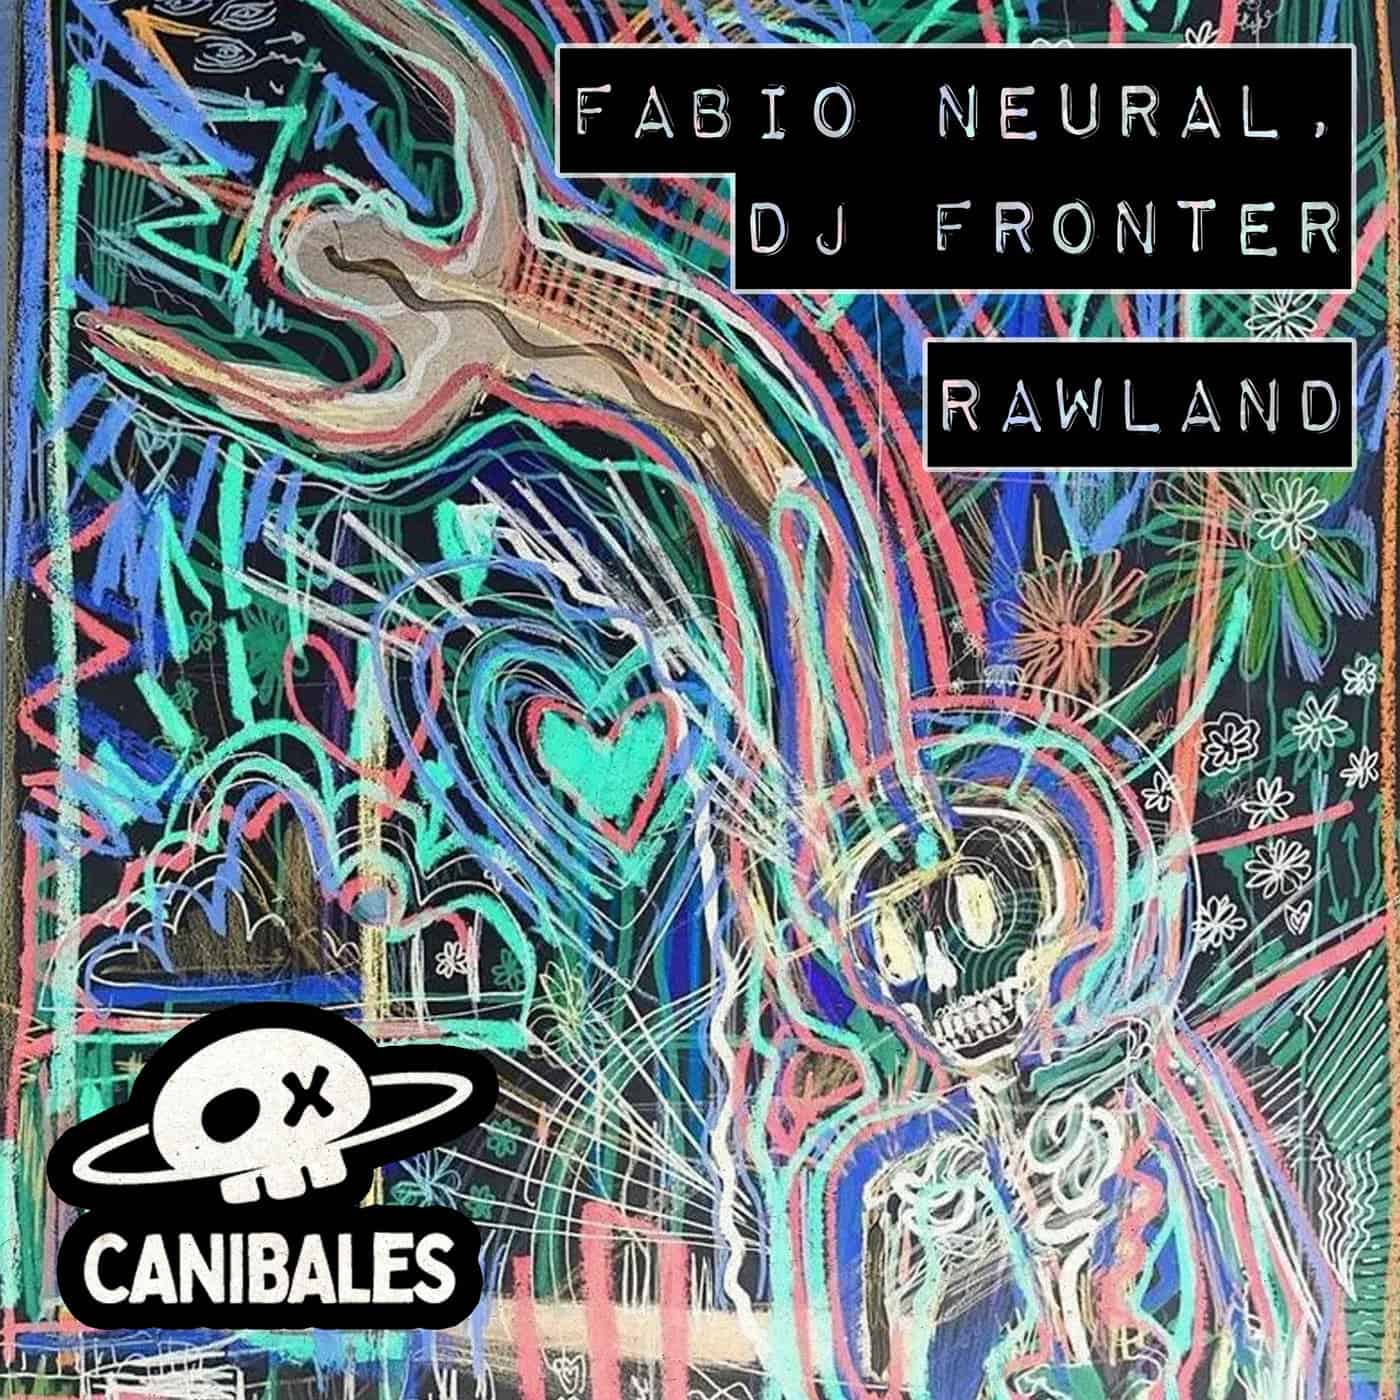 image cover: Fabio Neural, DJ Fronter - Rawland - Extended Mix on CANIBALES